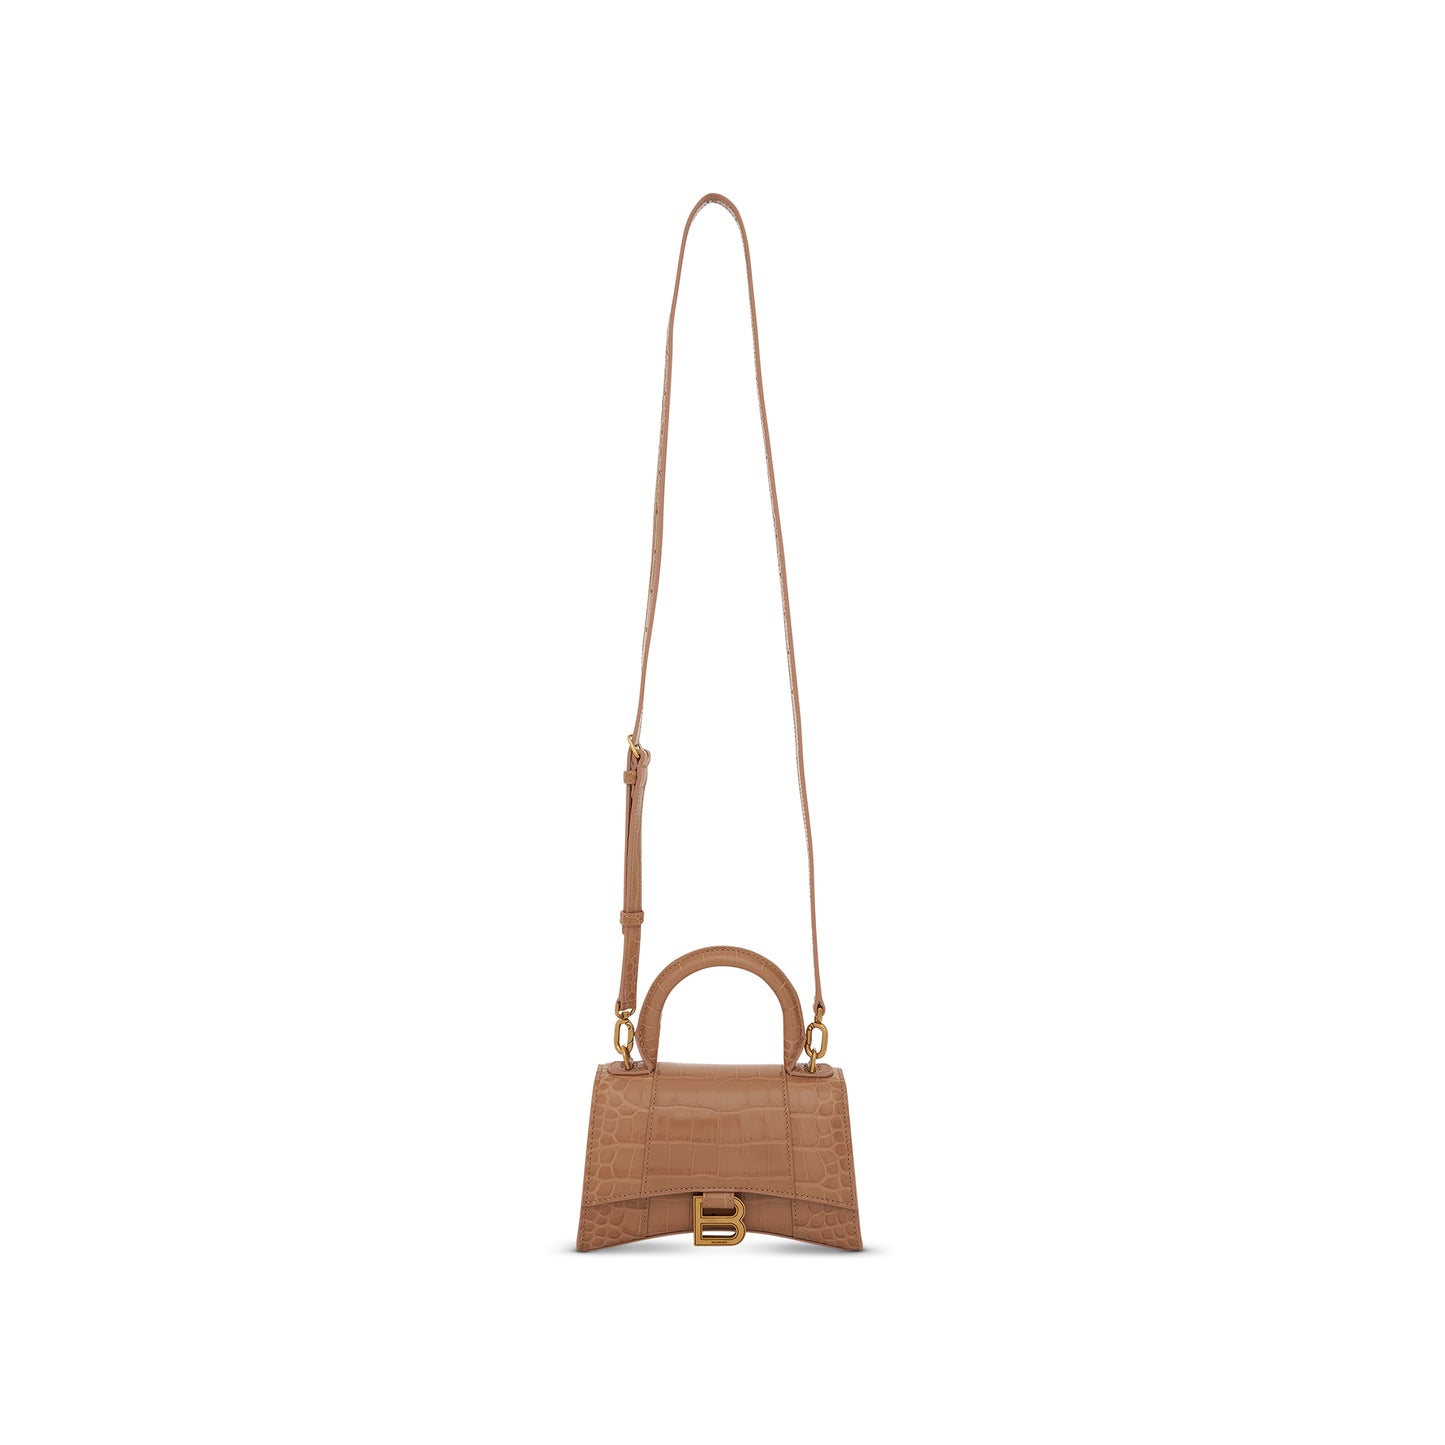 Hourglass XS Croco Embossed Bag in Beige with Gold Plague